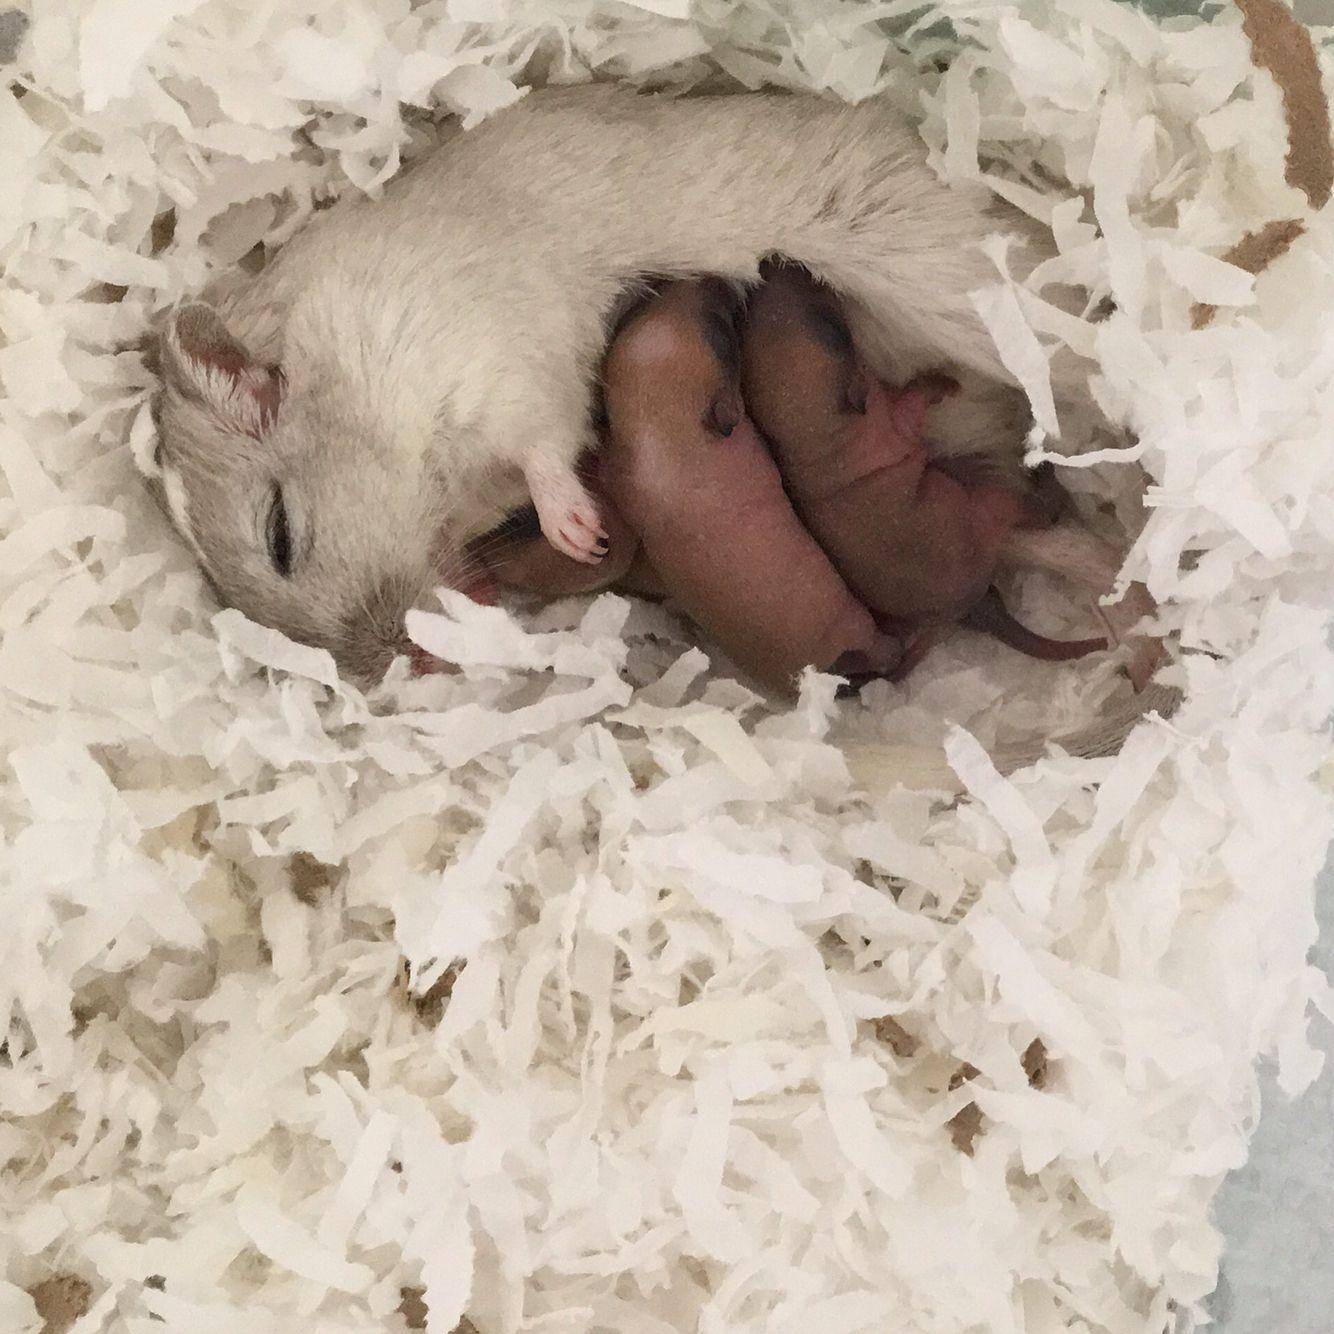 Adorable baby gerbils nursing. Check out more cute gerbil picture